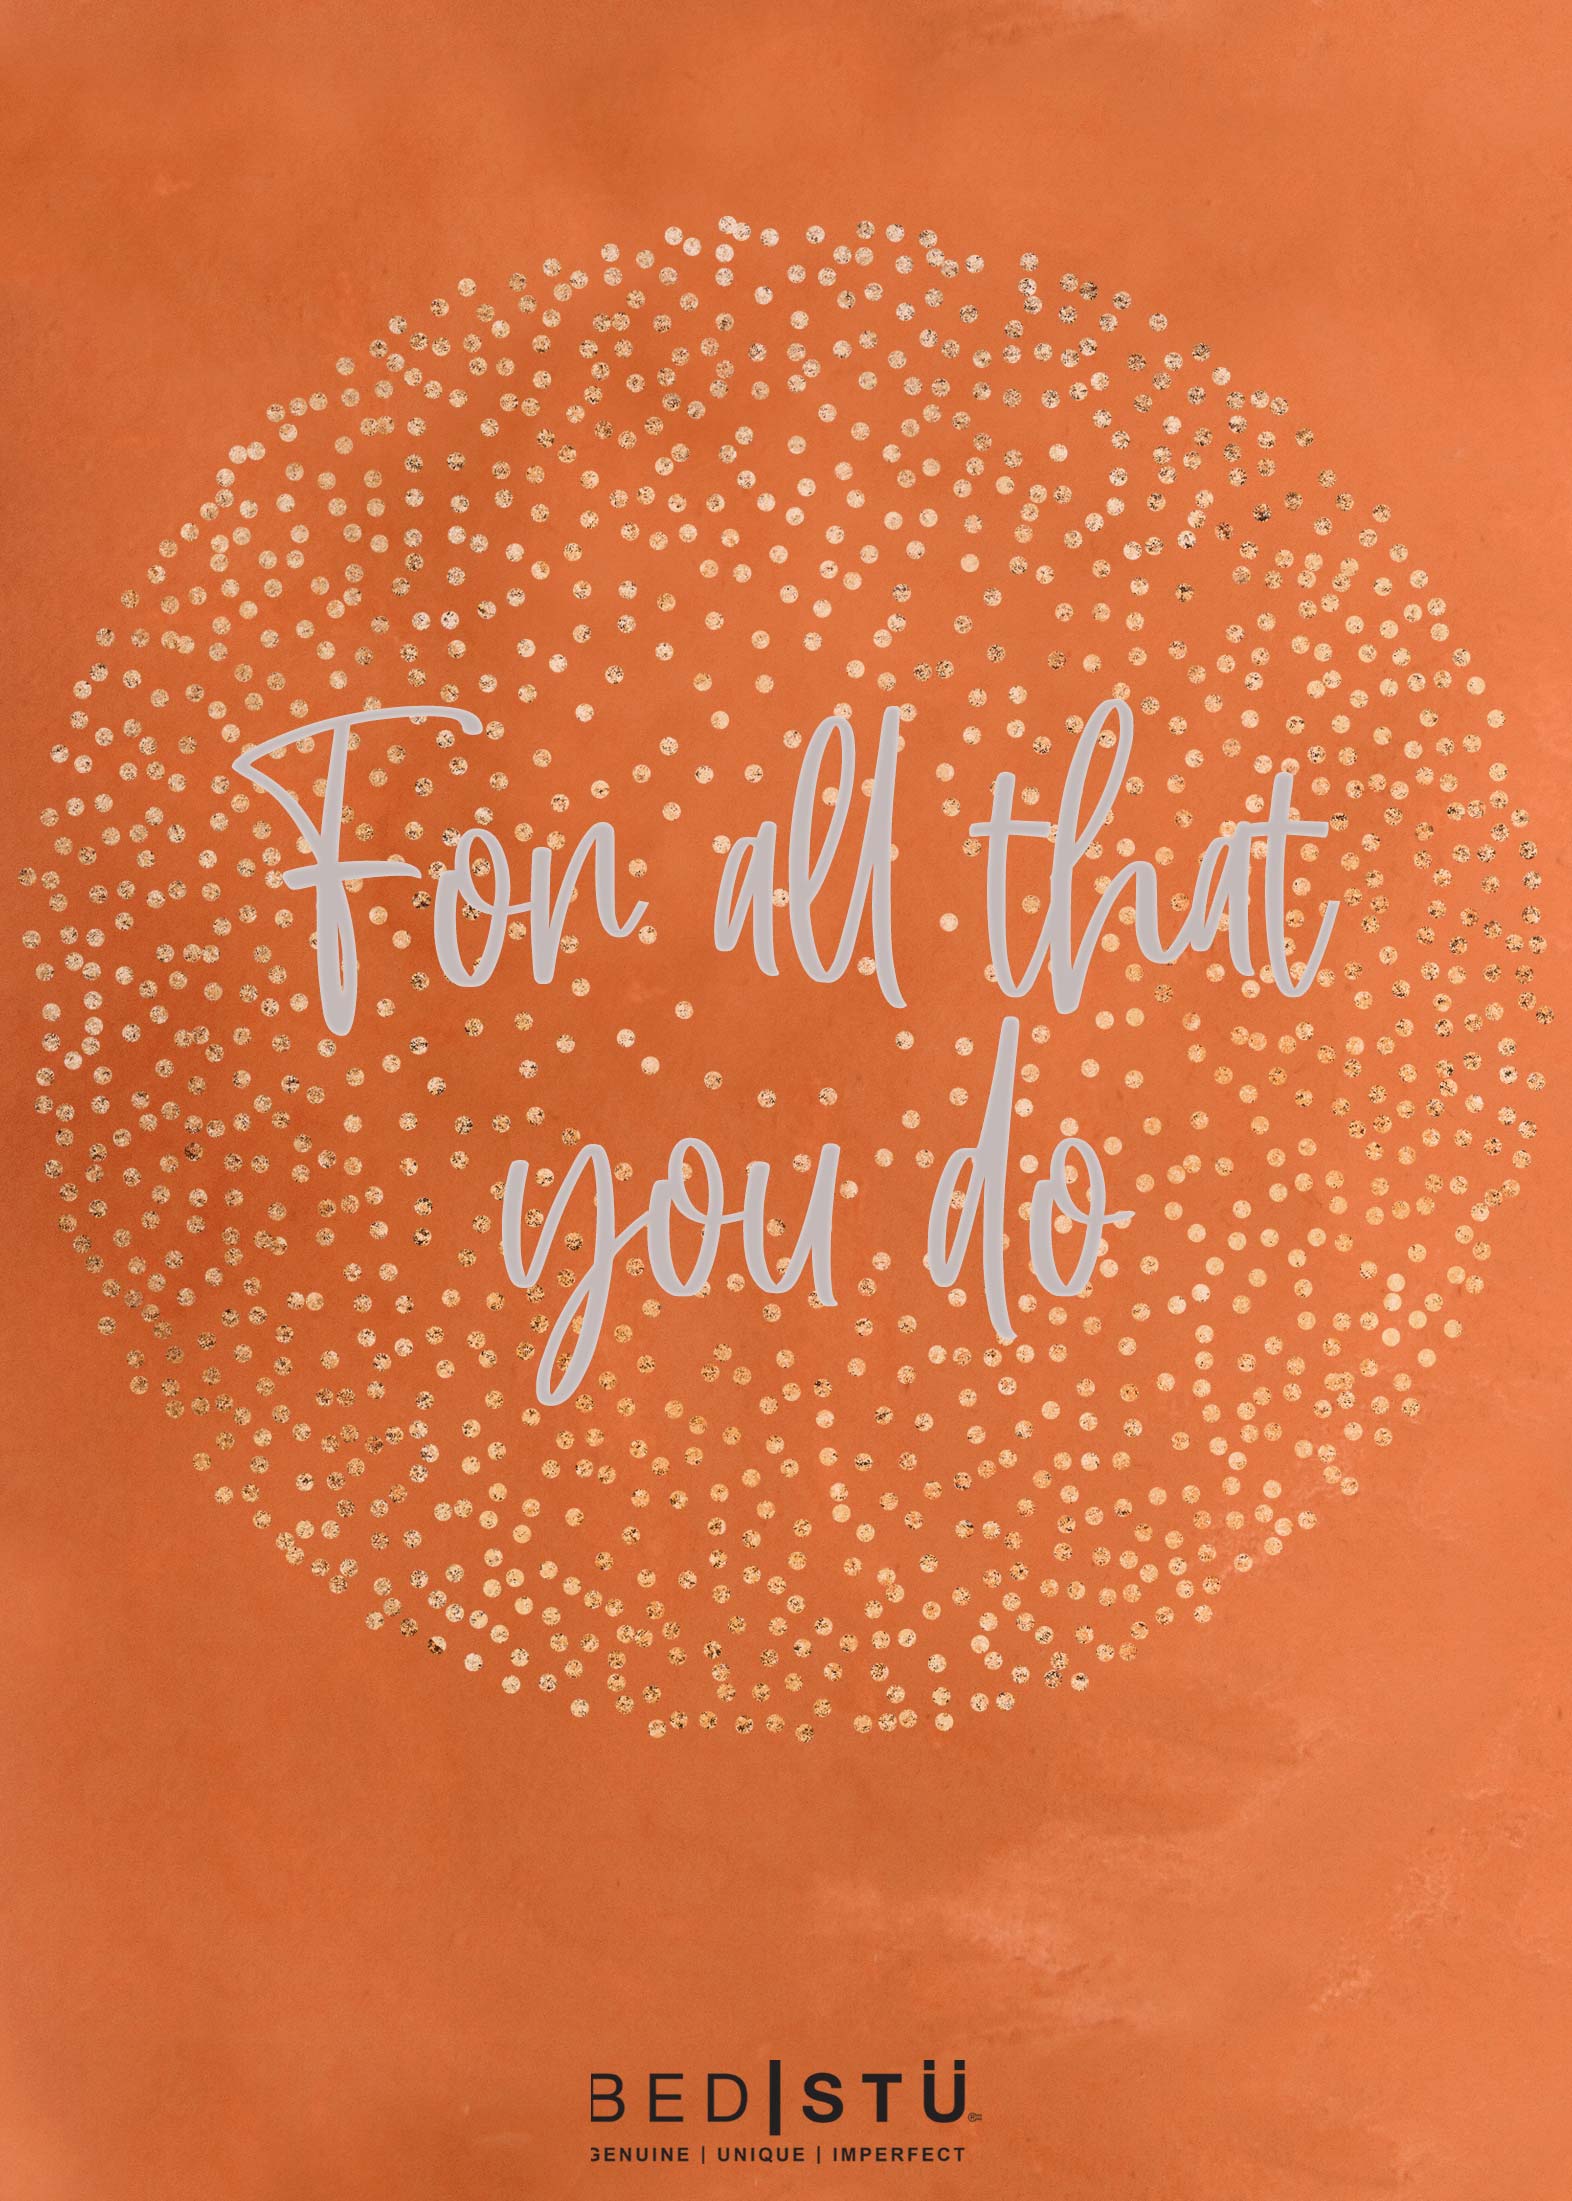 An orange background with the words "For All You Do" and the option to purchase an eGift card for bed|Stü.com as a thoughtful gift.